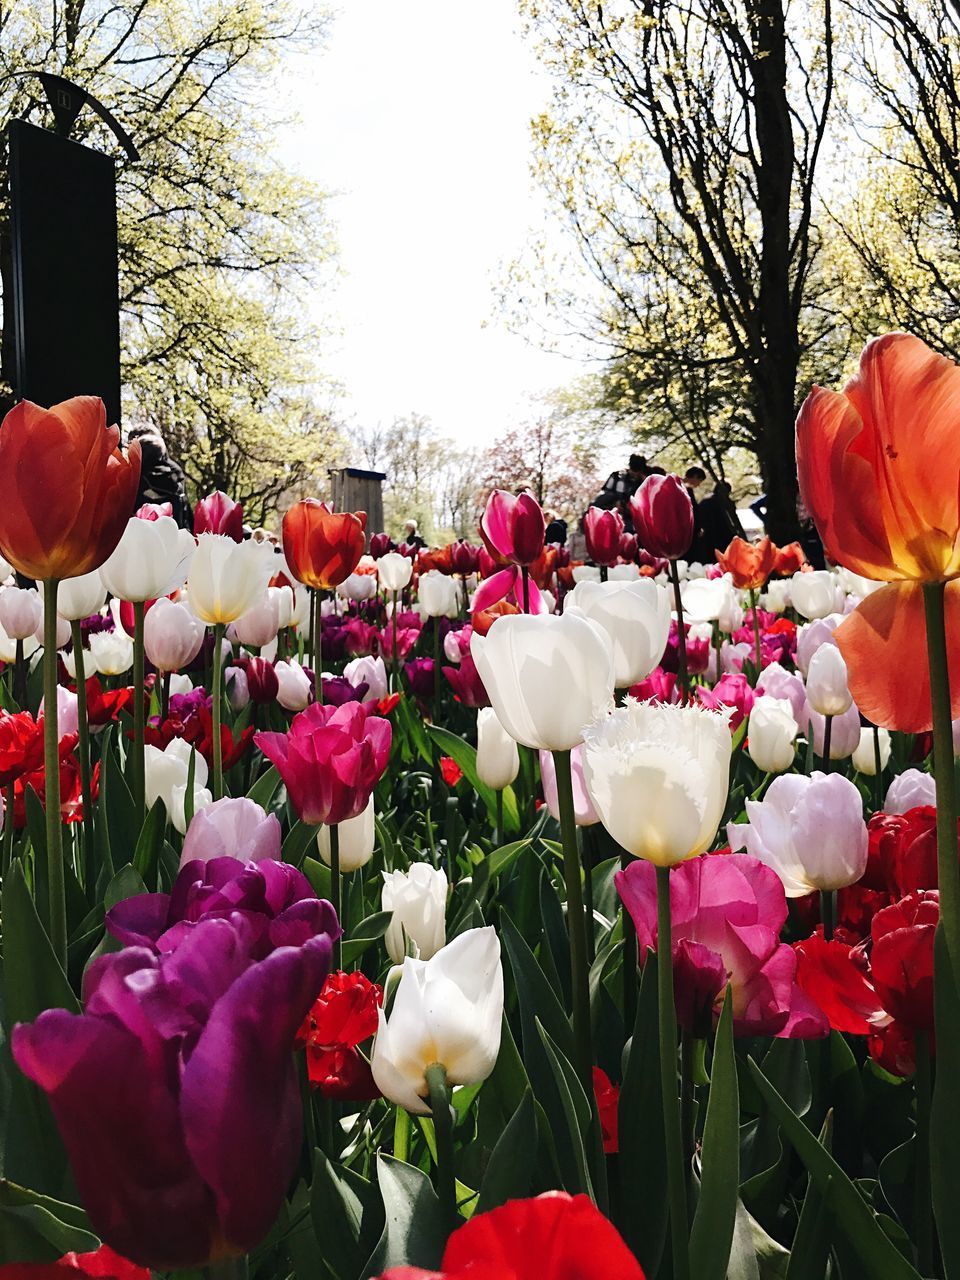 CLOSE-UP OF TULIPS BLOOMING AT PARK